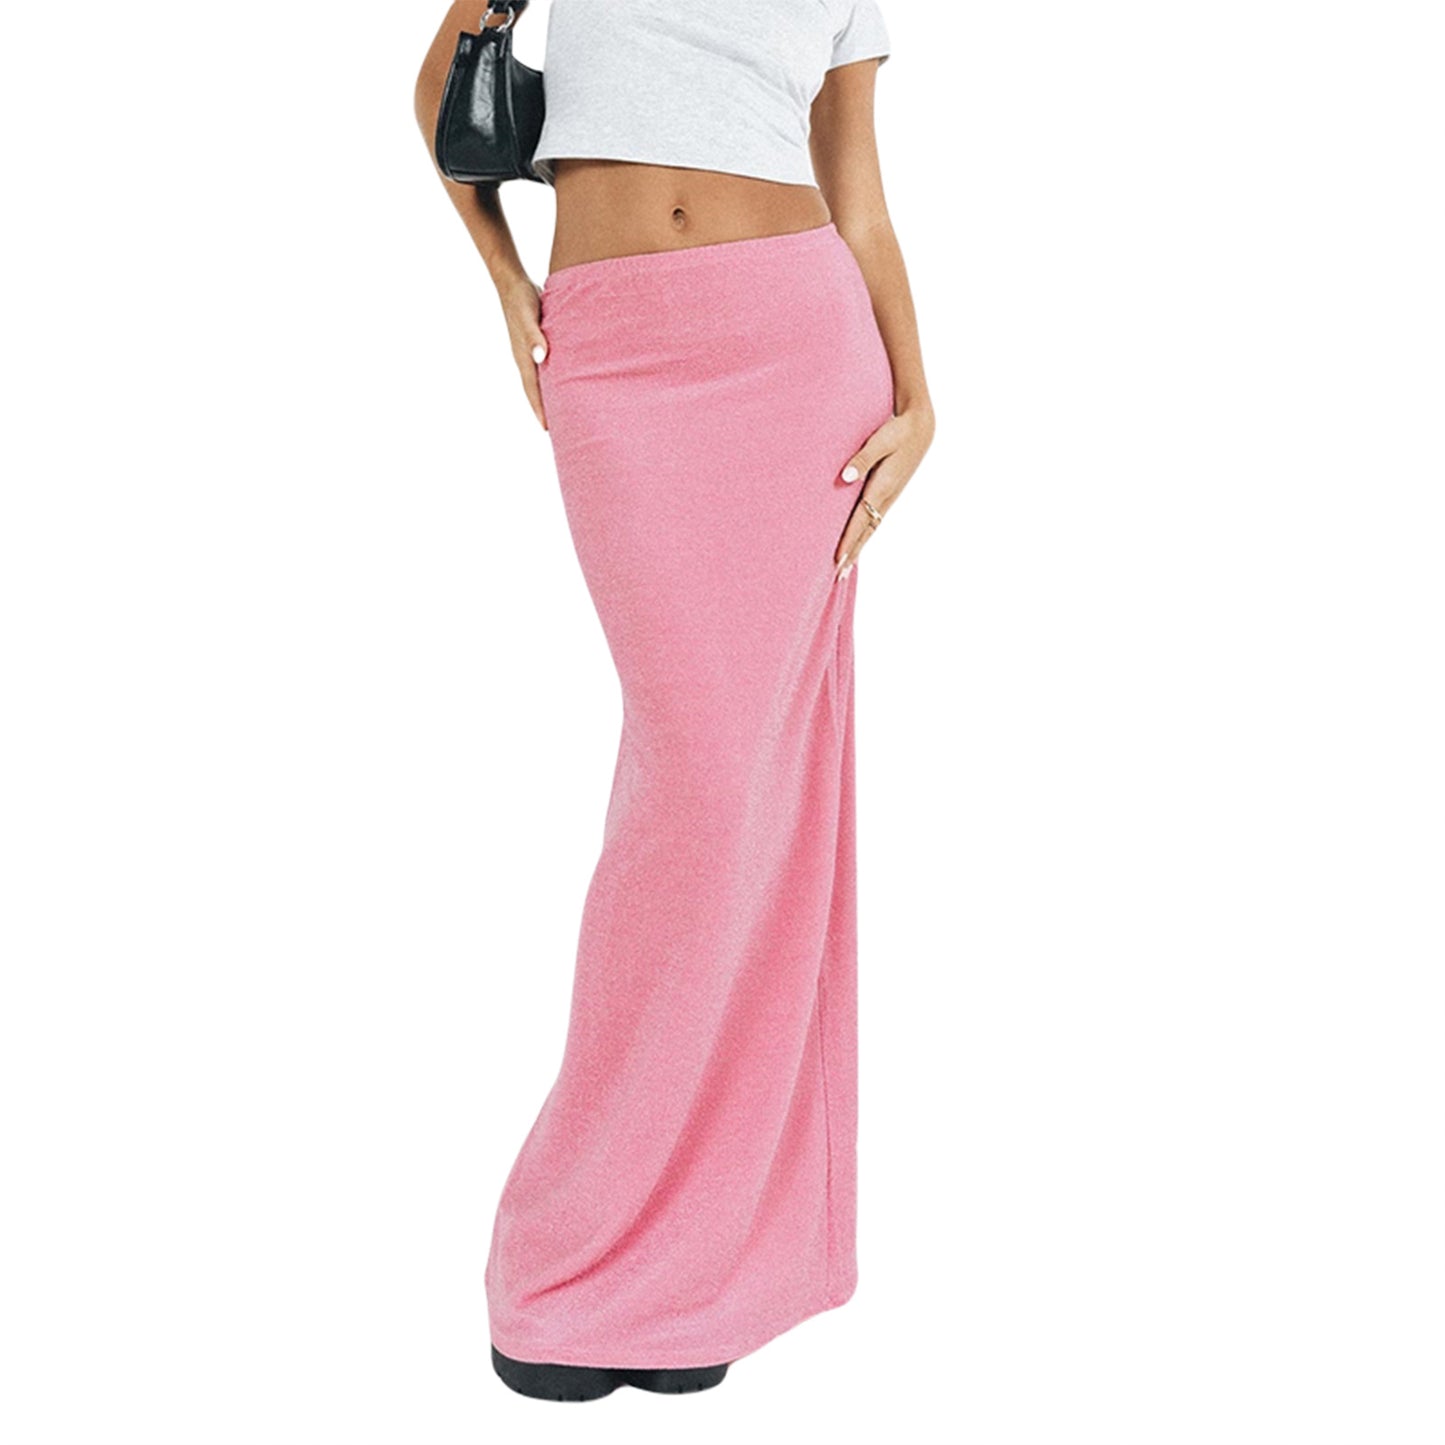 Hip-wrapped Long Women's Skirt 5 Colors